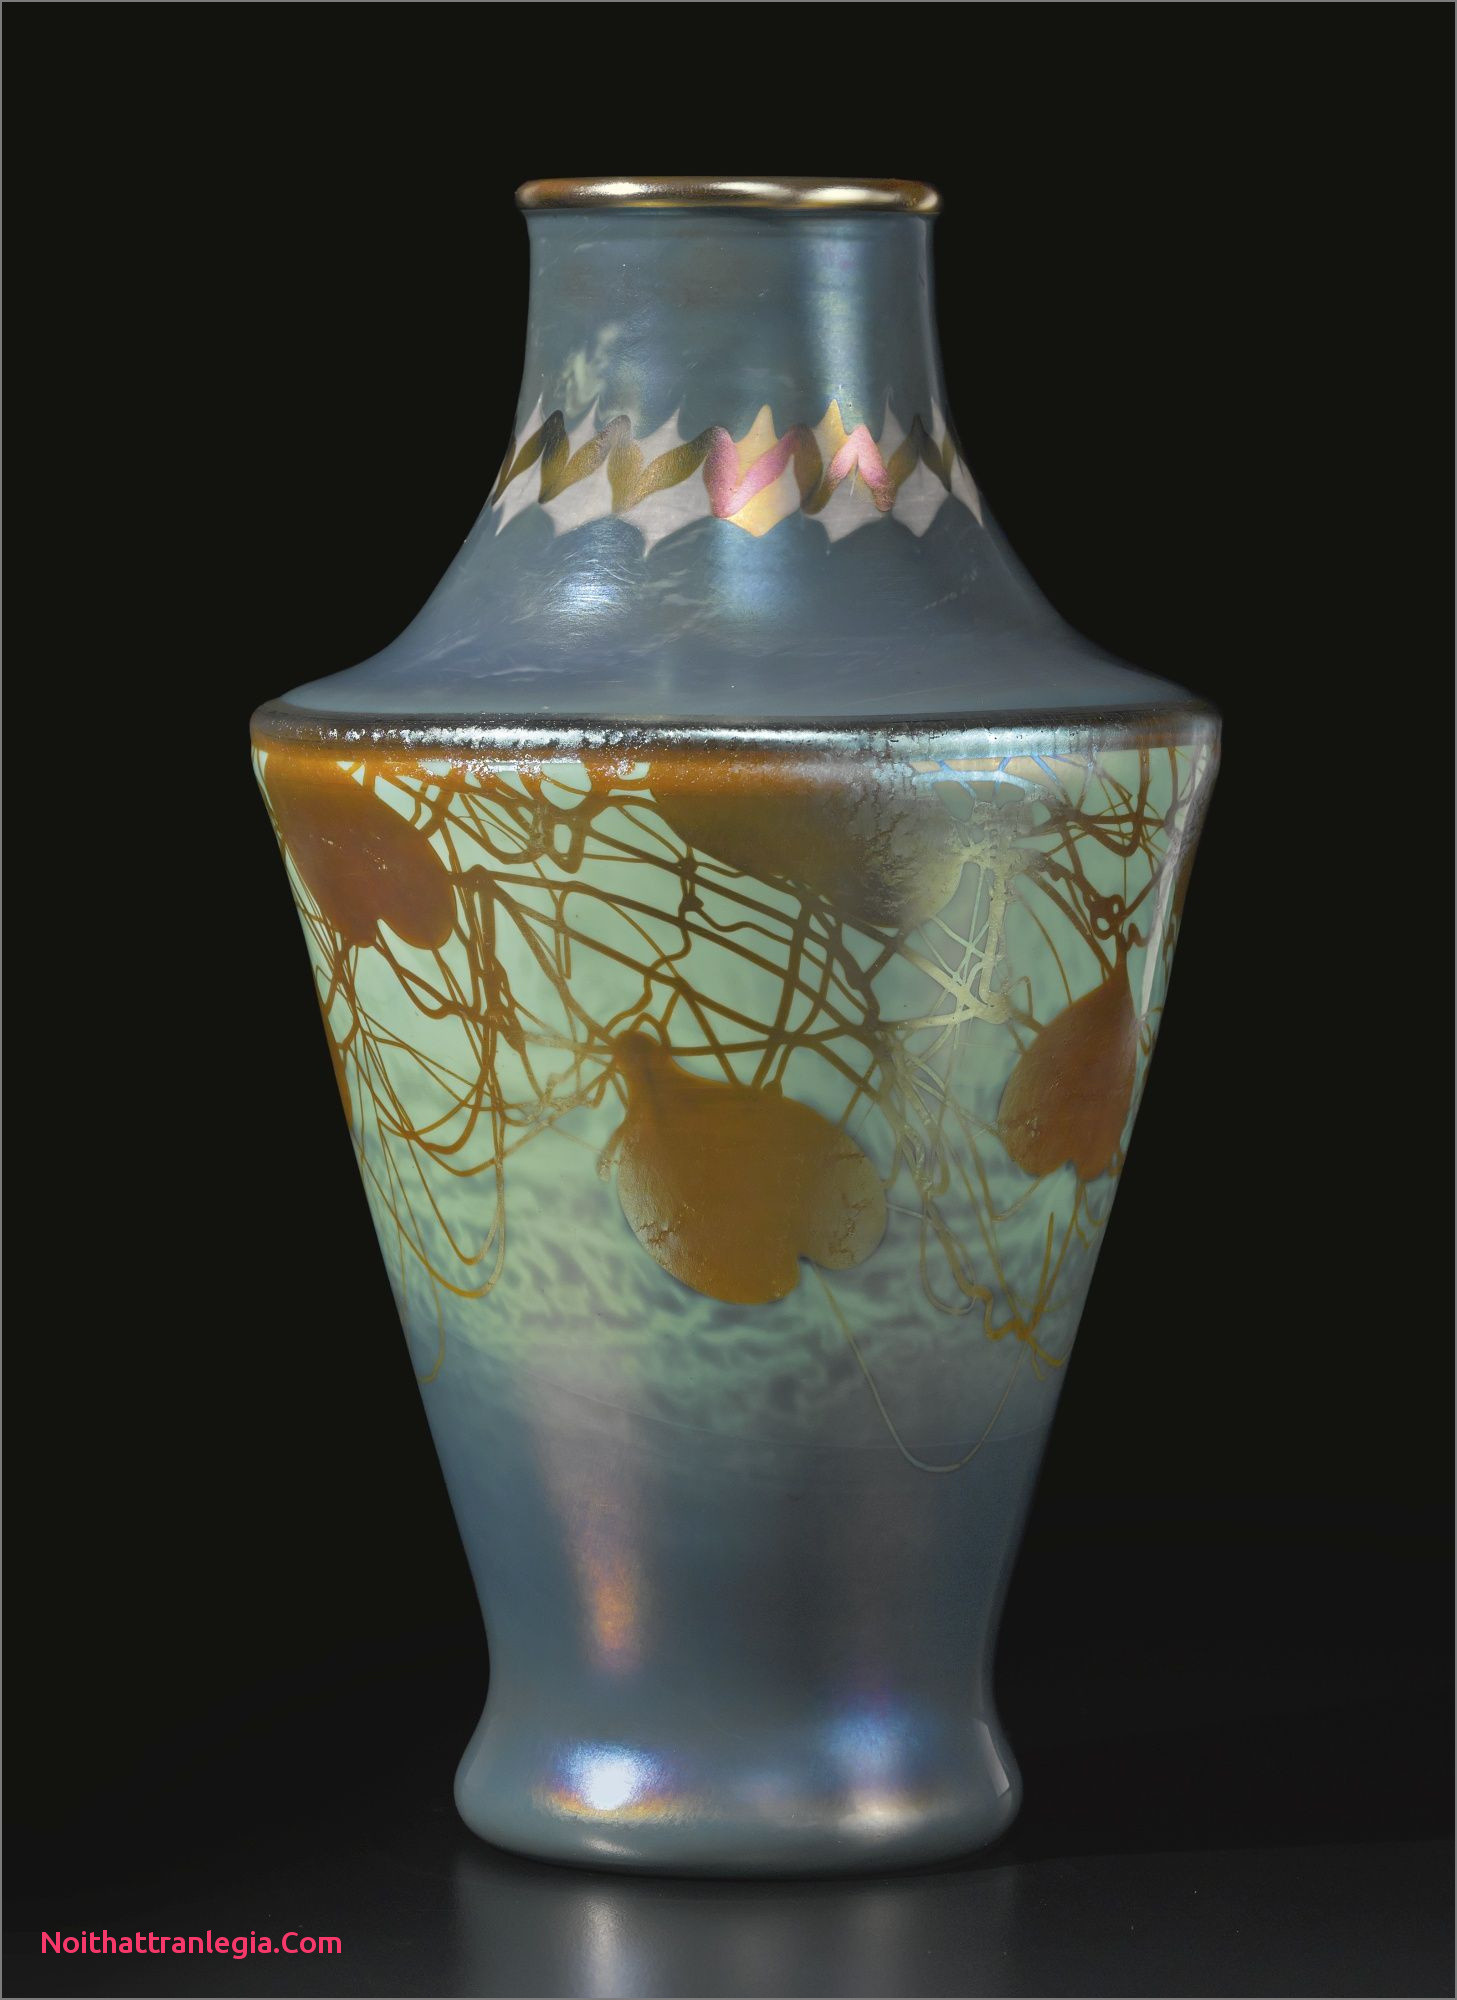 19 Fantastic Small Crystal Vase 2022 free download small crystal vase of 20 cut glass antique vase noithattranlegia vases design in steuben glass works a rare tyrian vase engraved with indistinct mark aurene glass with